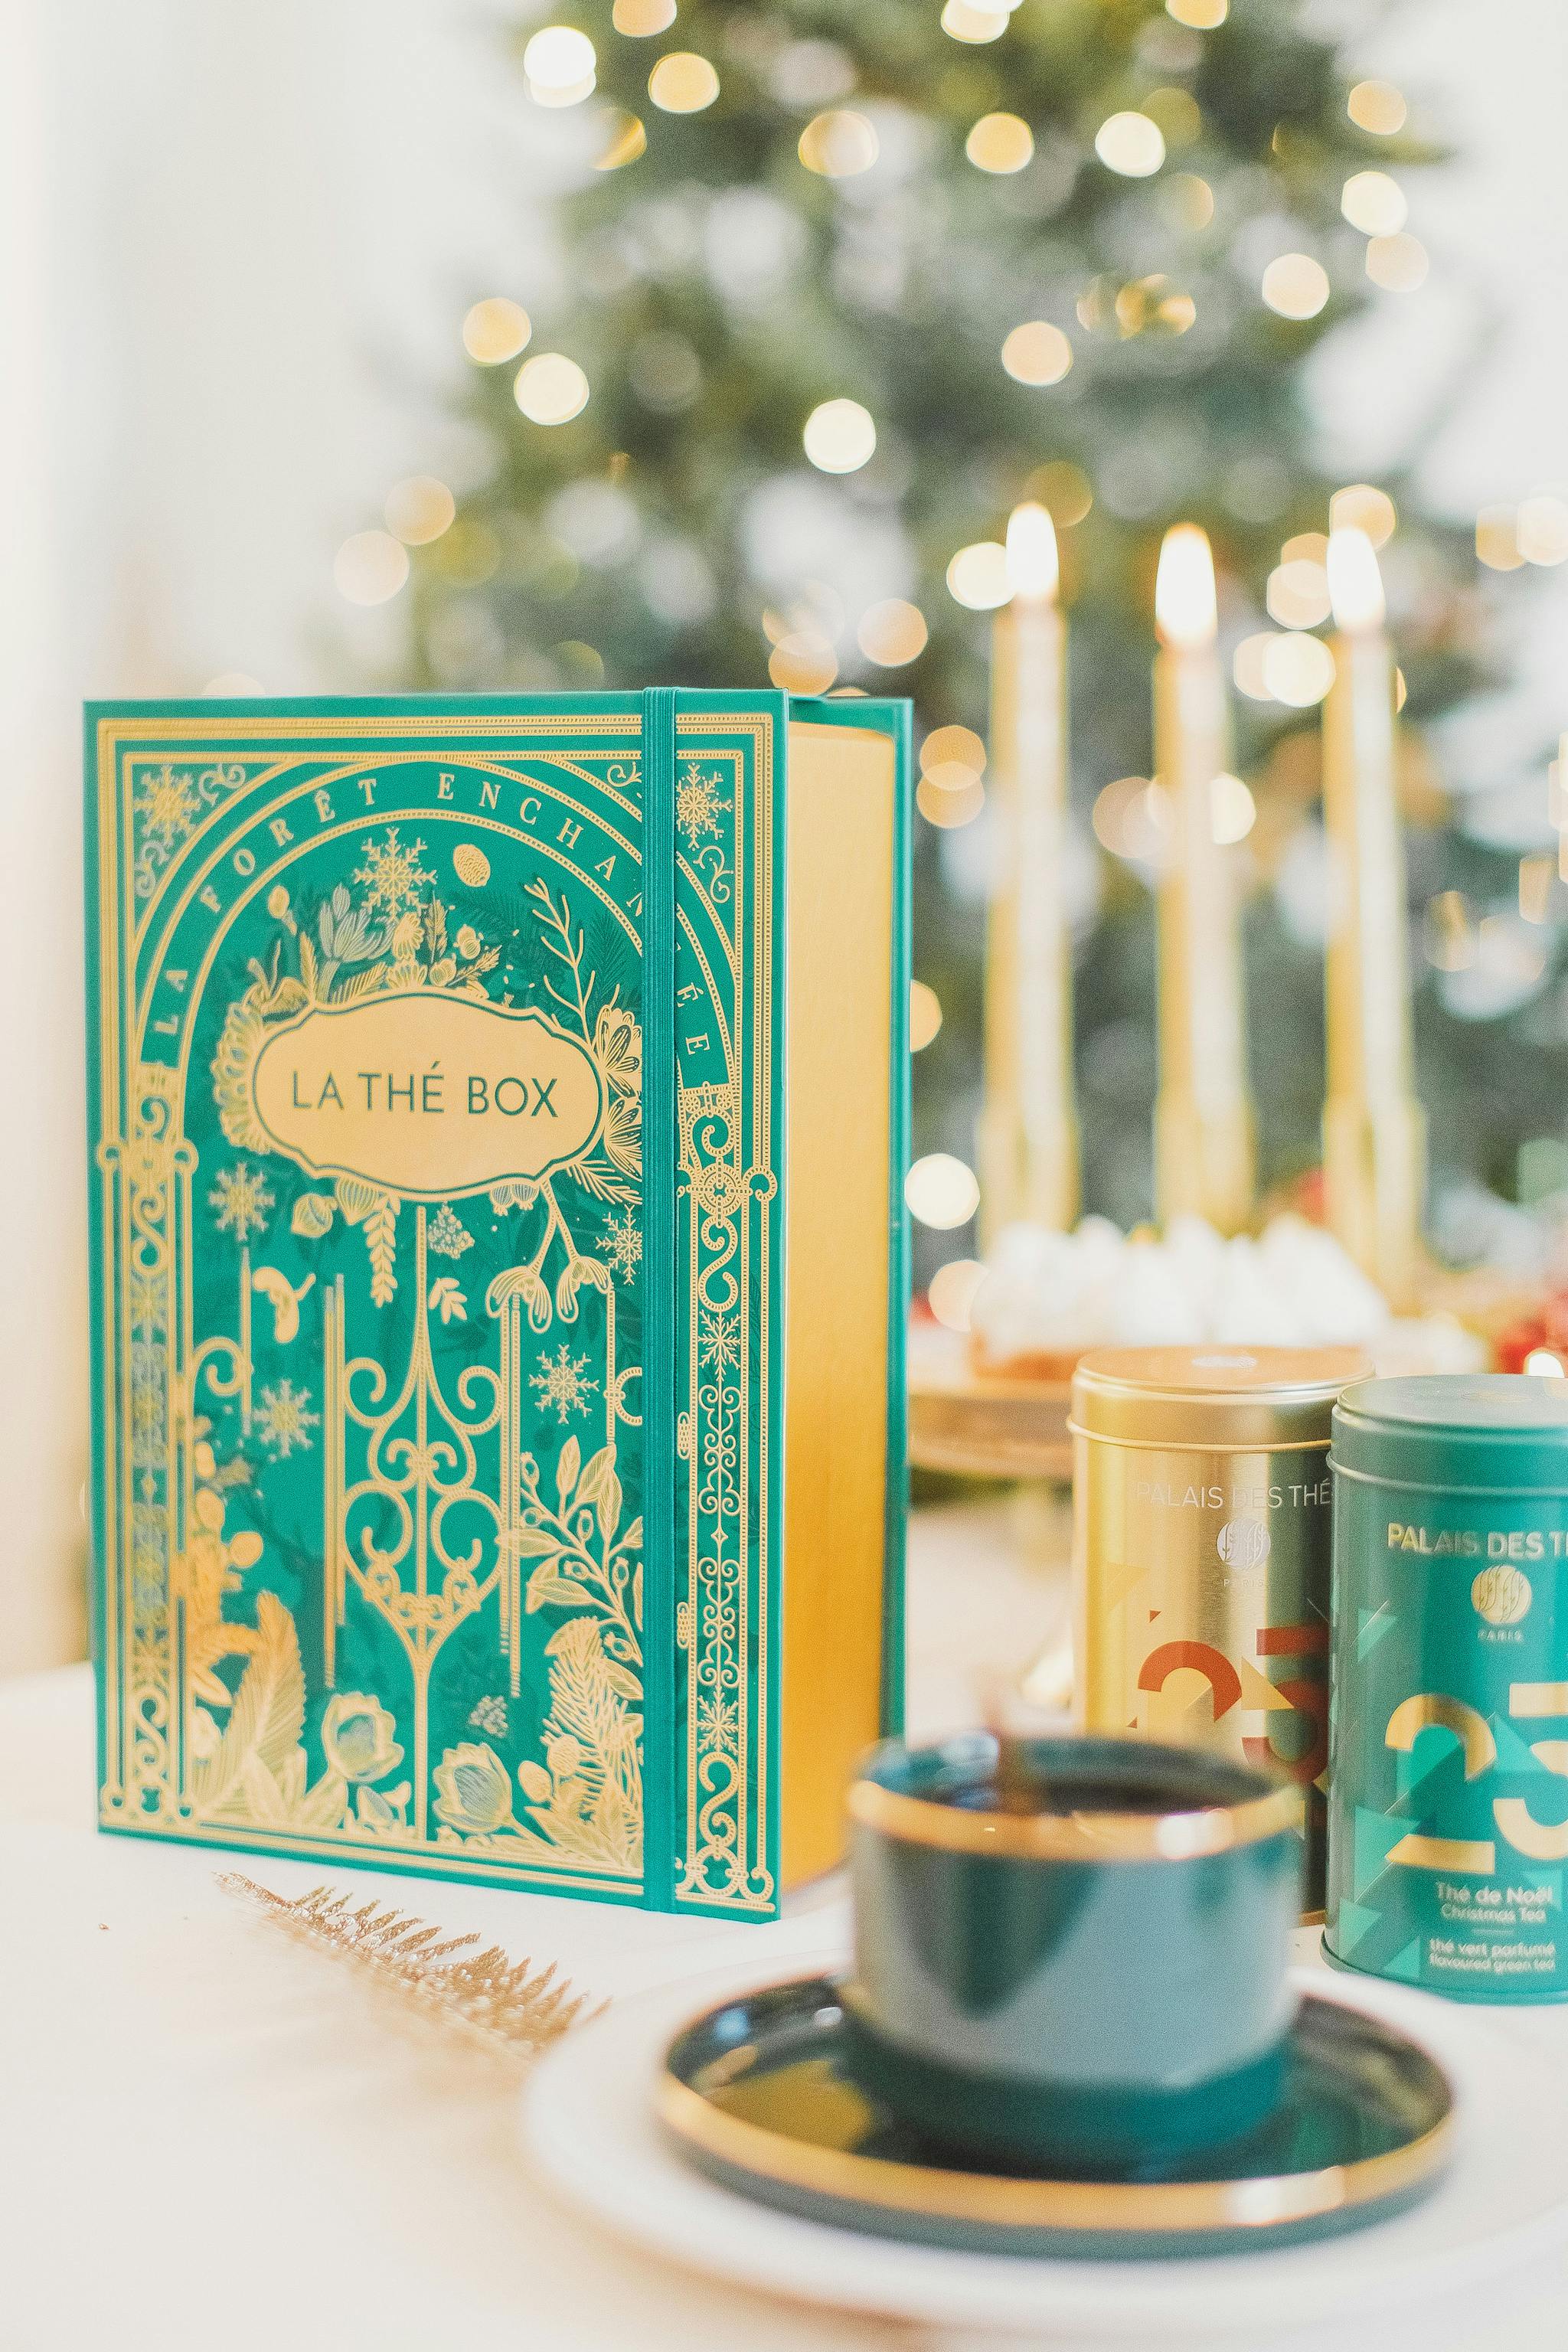 Packshot of la thé box Christmas Dreams edition with a cup of tea.